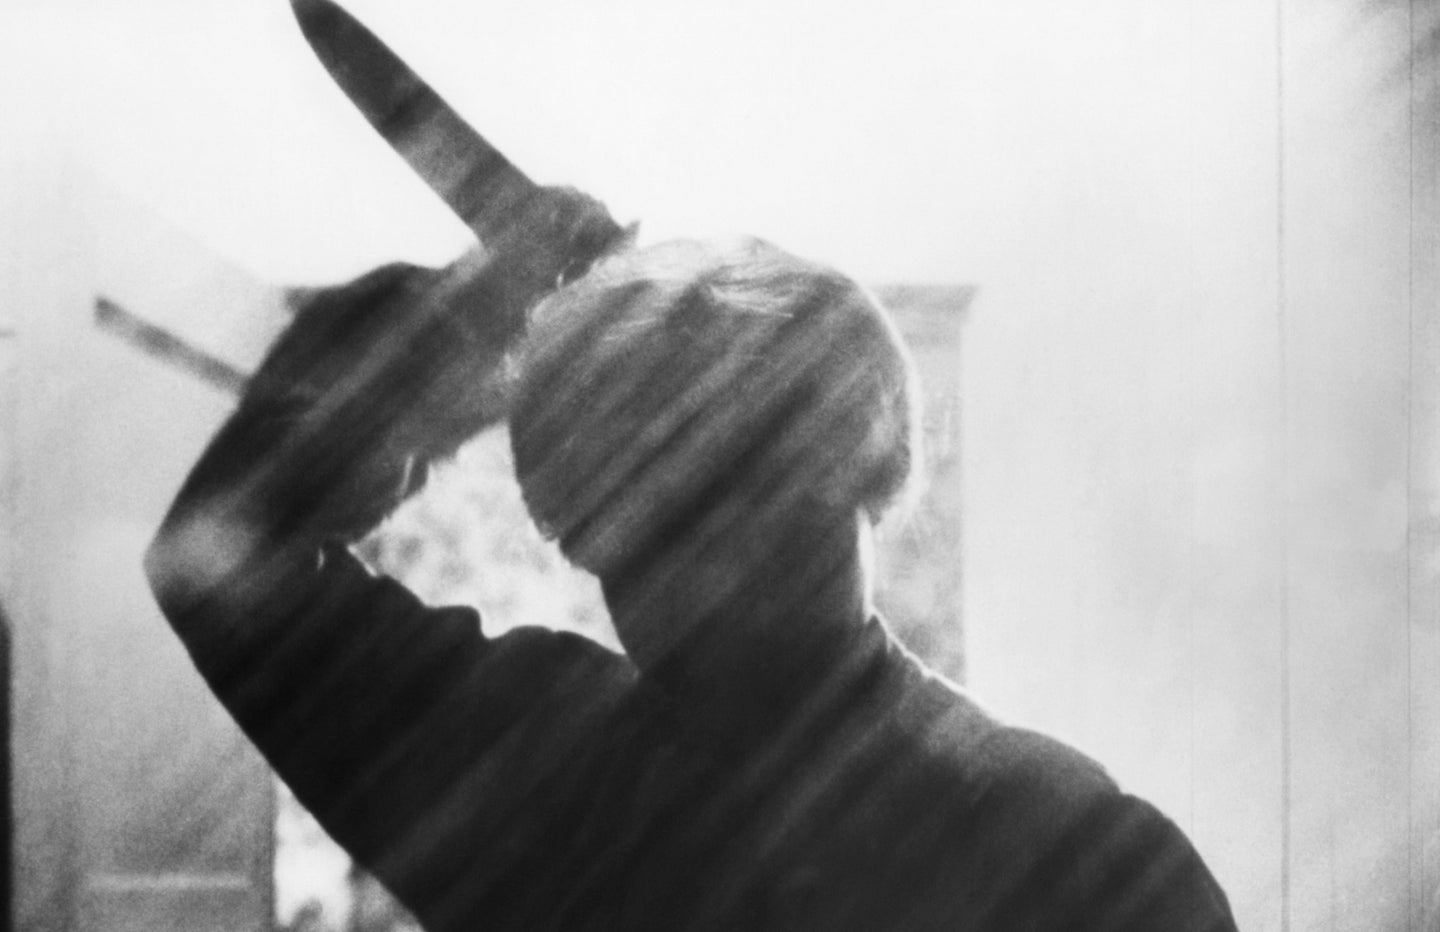 A movie still from 'Psycho,' showing the silhouette of a man holding a knife.